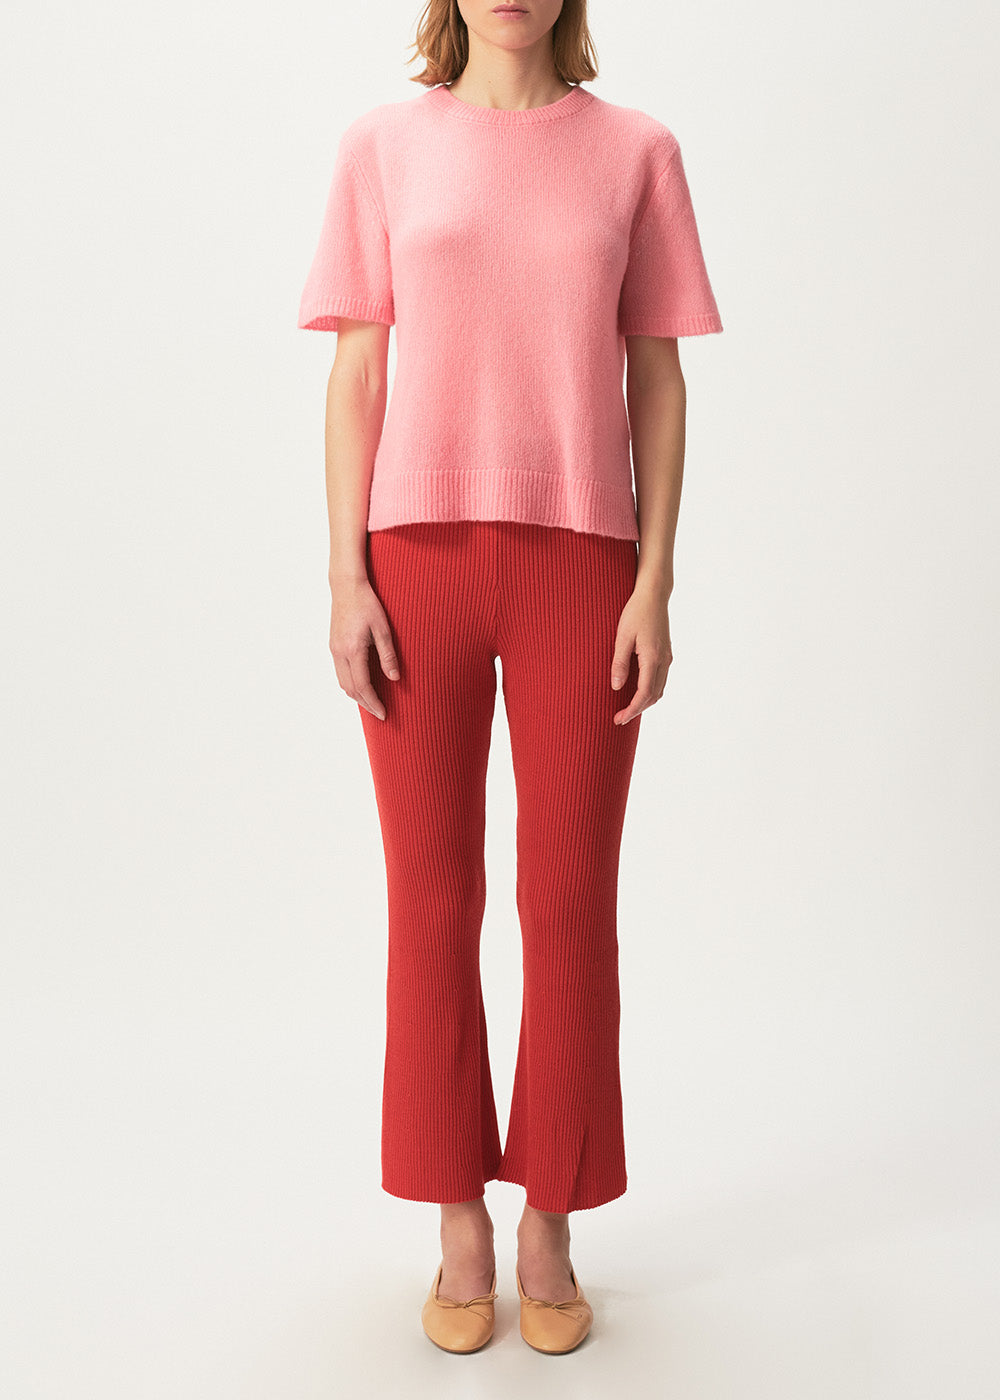 Tilly Flared Trousers - Small / Cherry